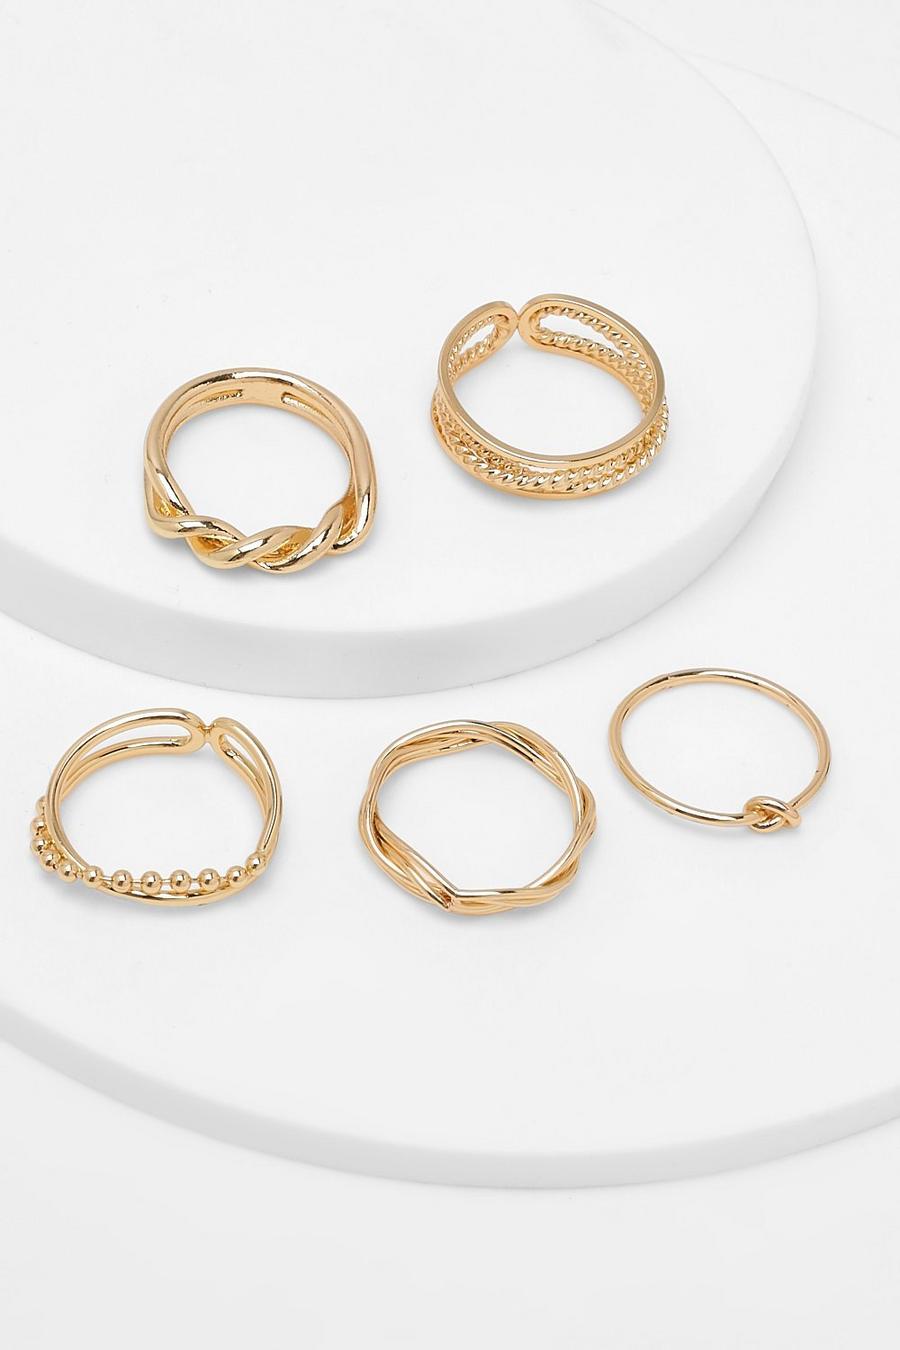 Gold Twist Knot 5 Pack Rings